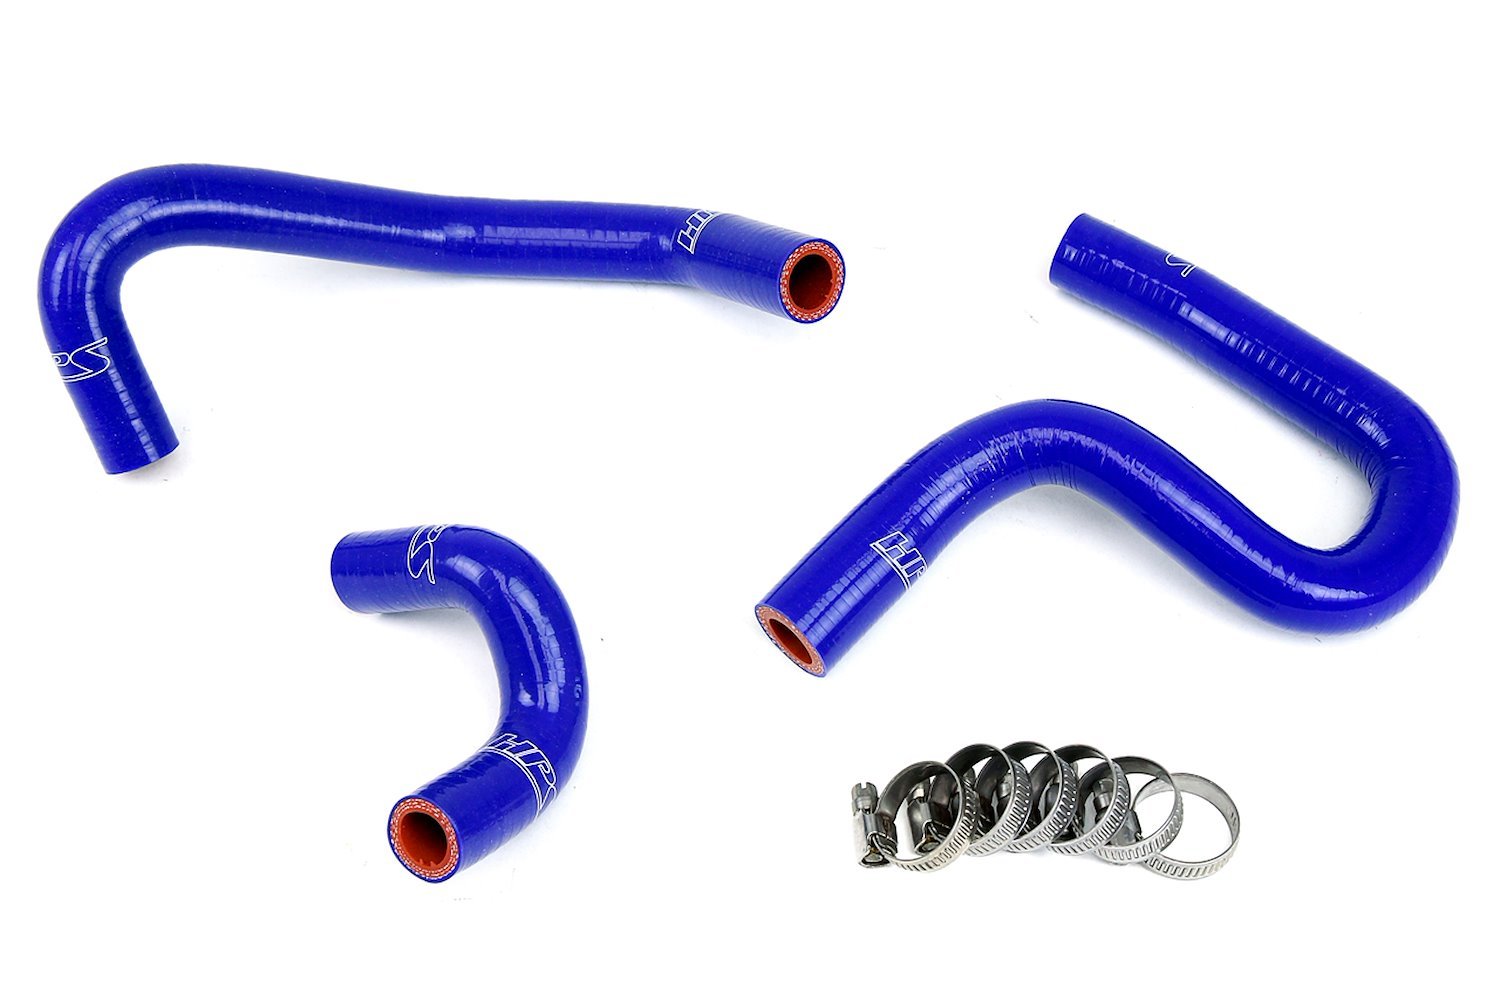 57-1797-BLUE Heater Hose Kit, High-Temp 3-Ply Reinforced Silicone, Replace OEM Rubber Heater Coolant Hoses